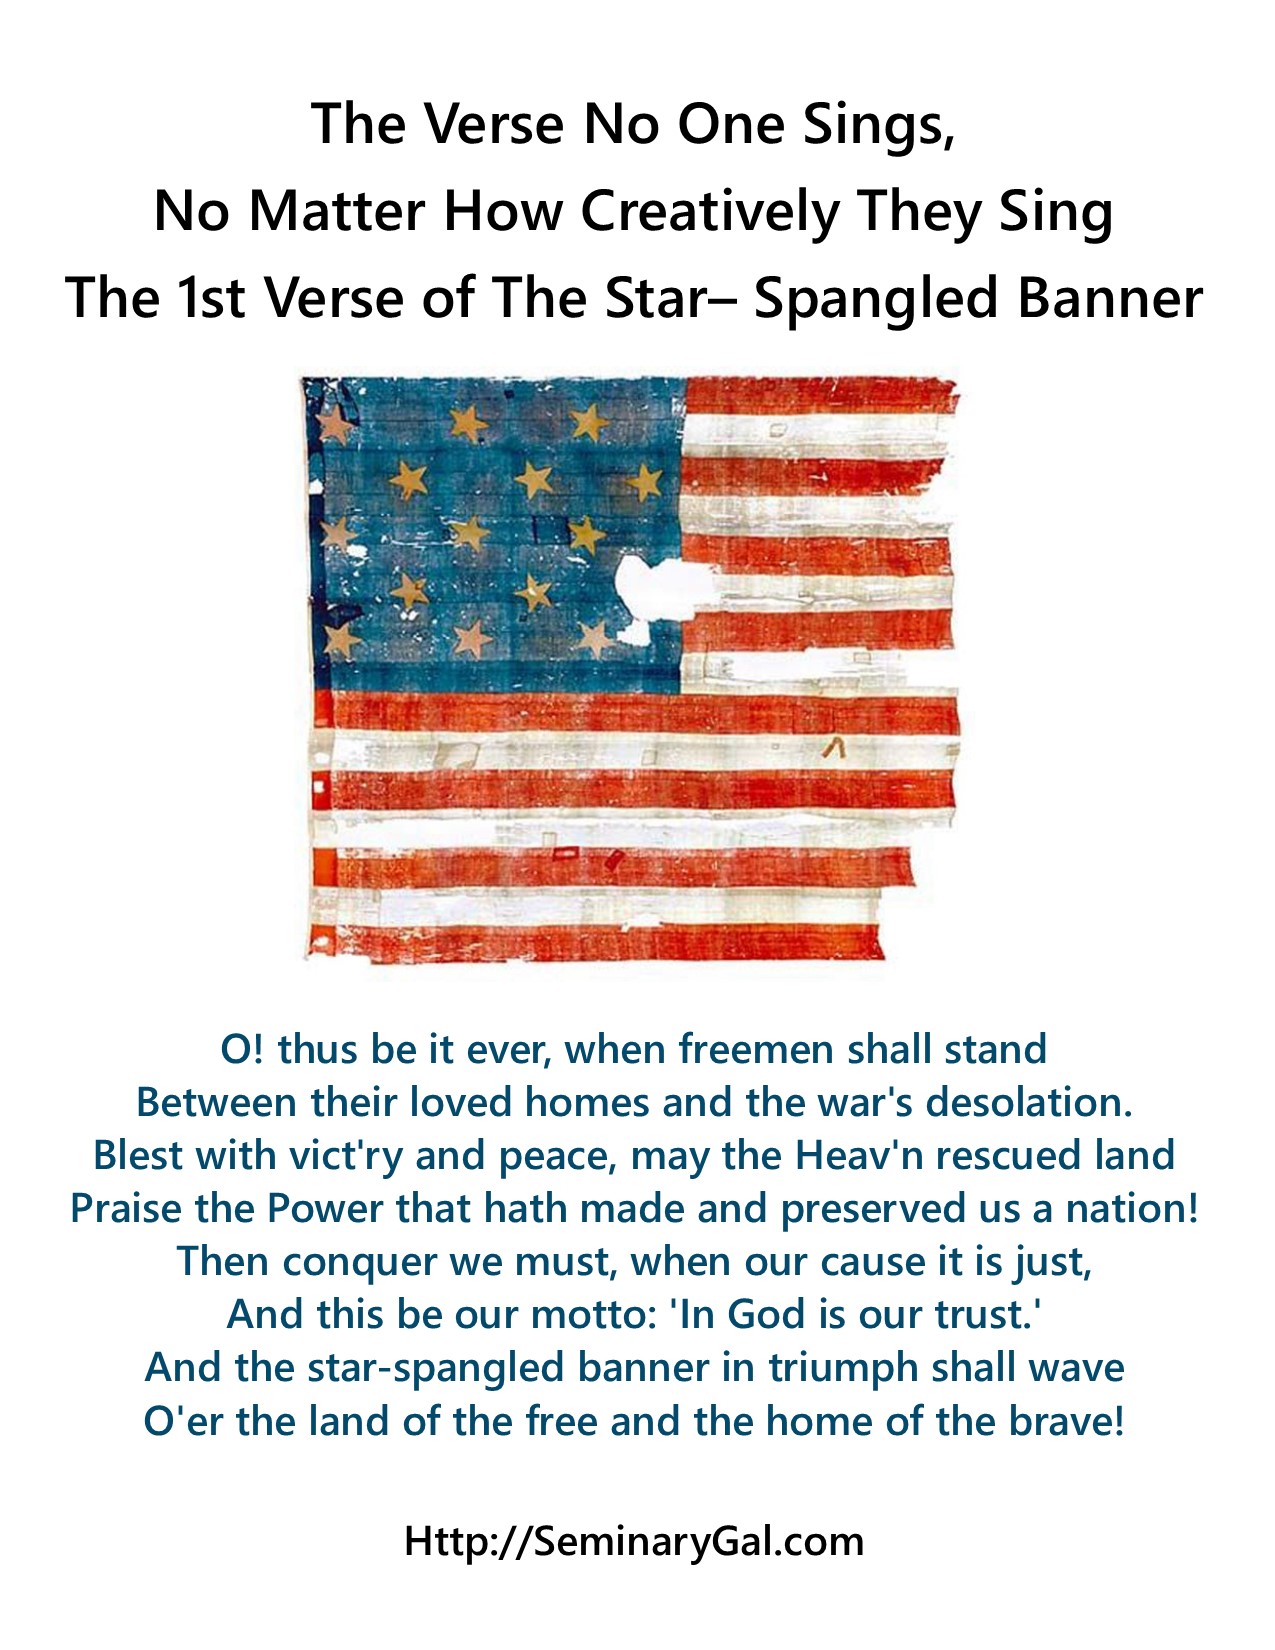 what is the star spangled banner song about